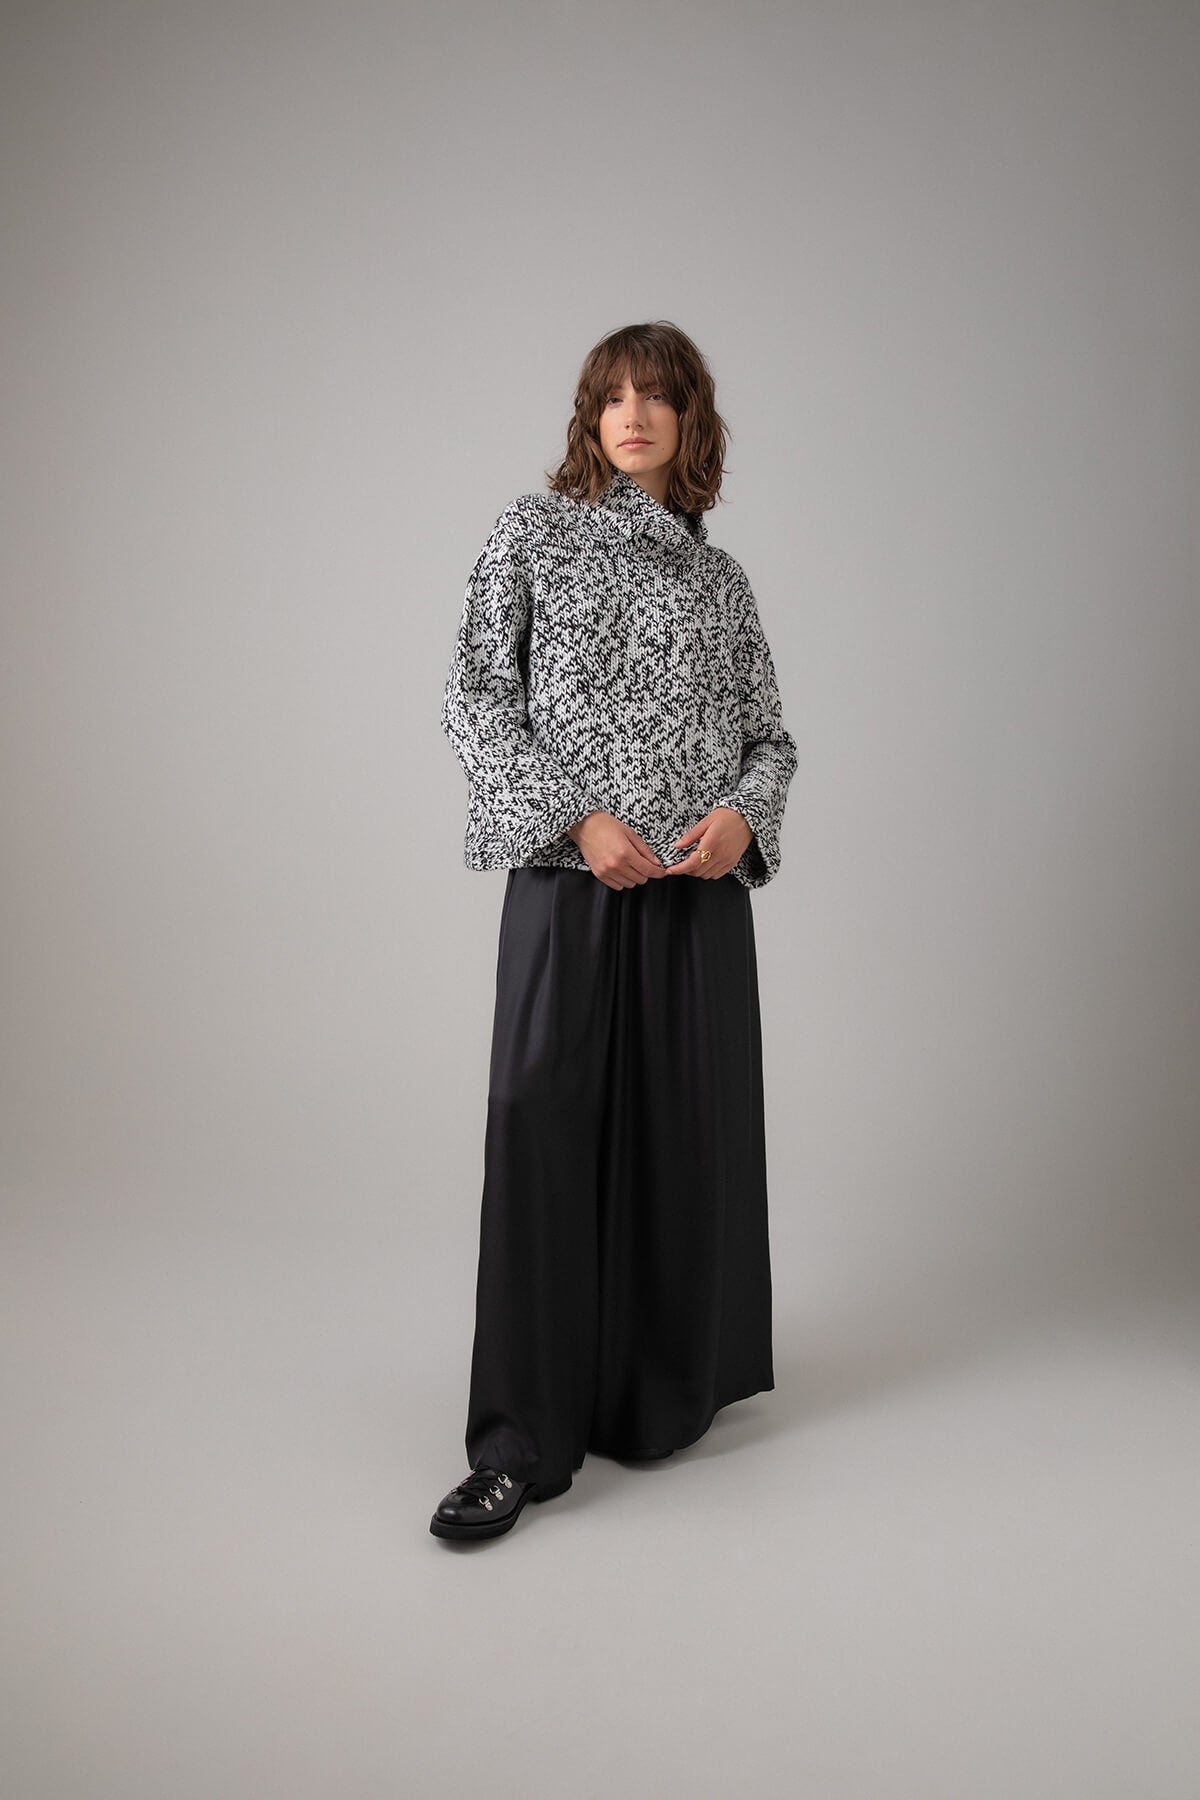 Johnstons of Elgin Women's Handknit Look Cashmere Marl Roll Neck Sweater in Black & White Marl worn with a Long Black Skirt on a grey background KAB05154HA7149